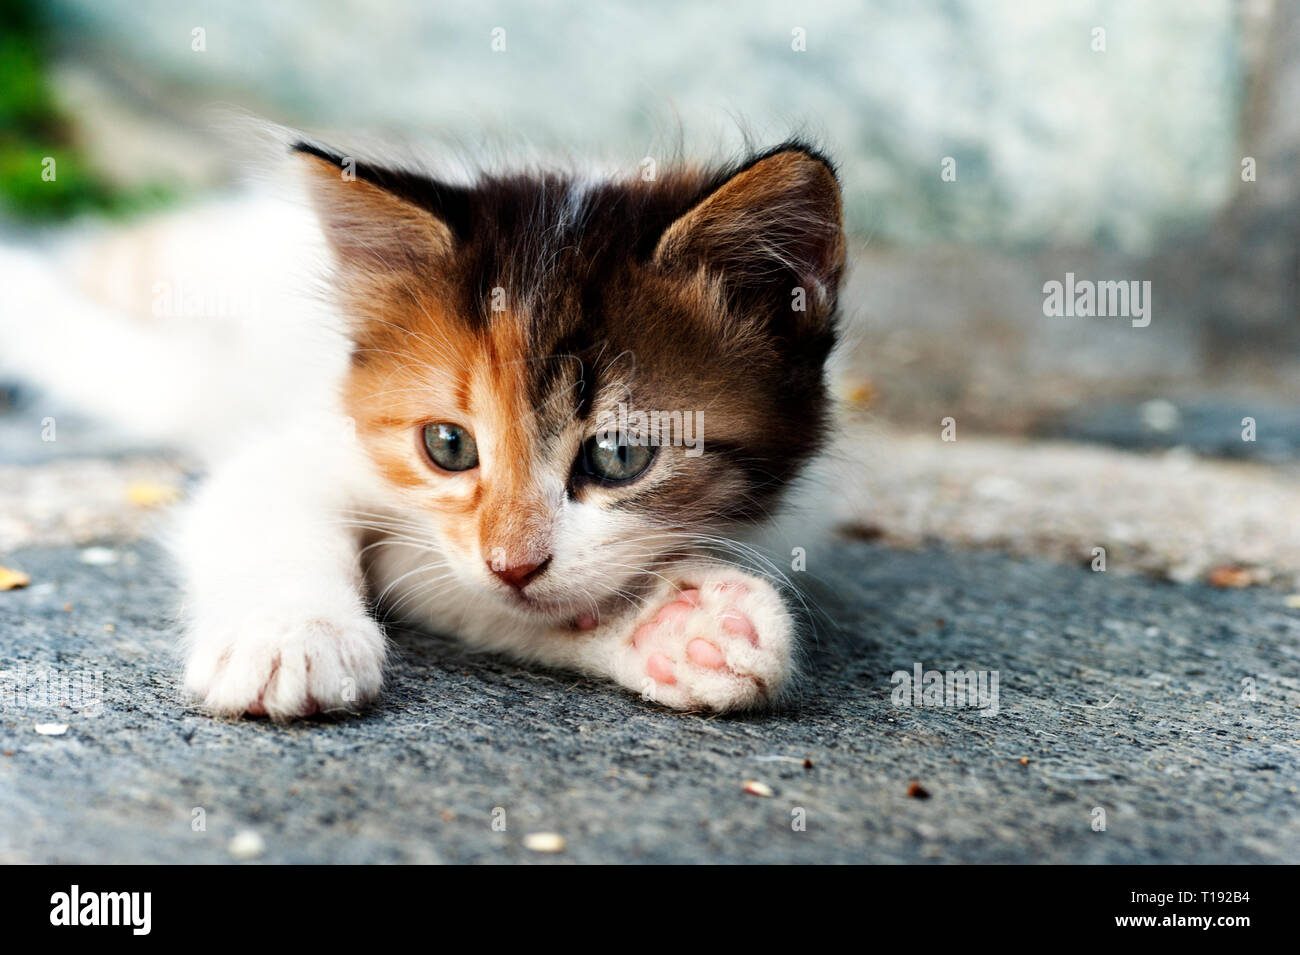 Close up of a calico kitten lying down outdoors Stock Photo